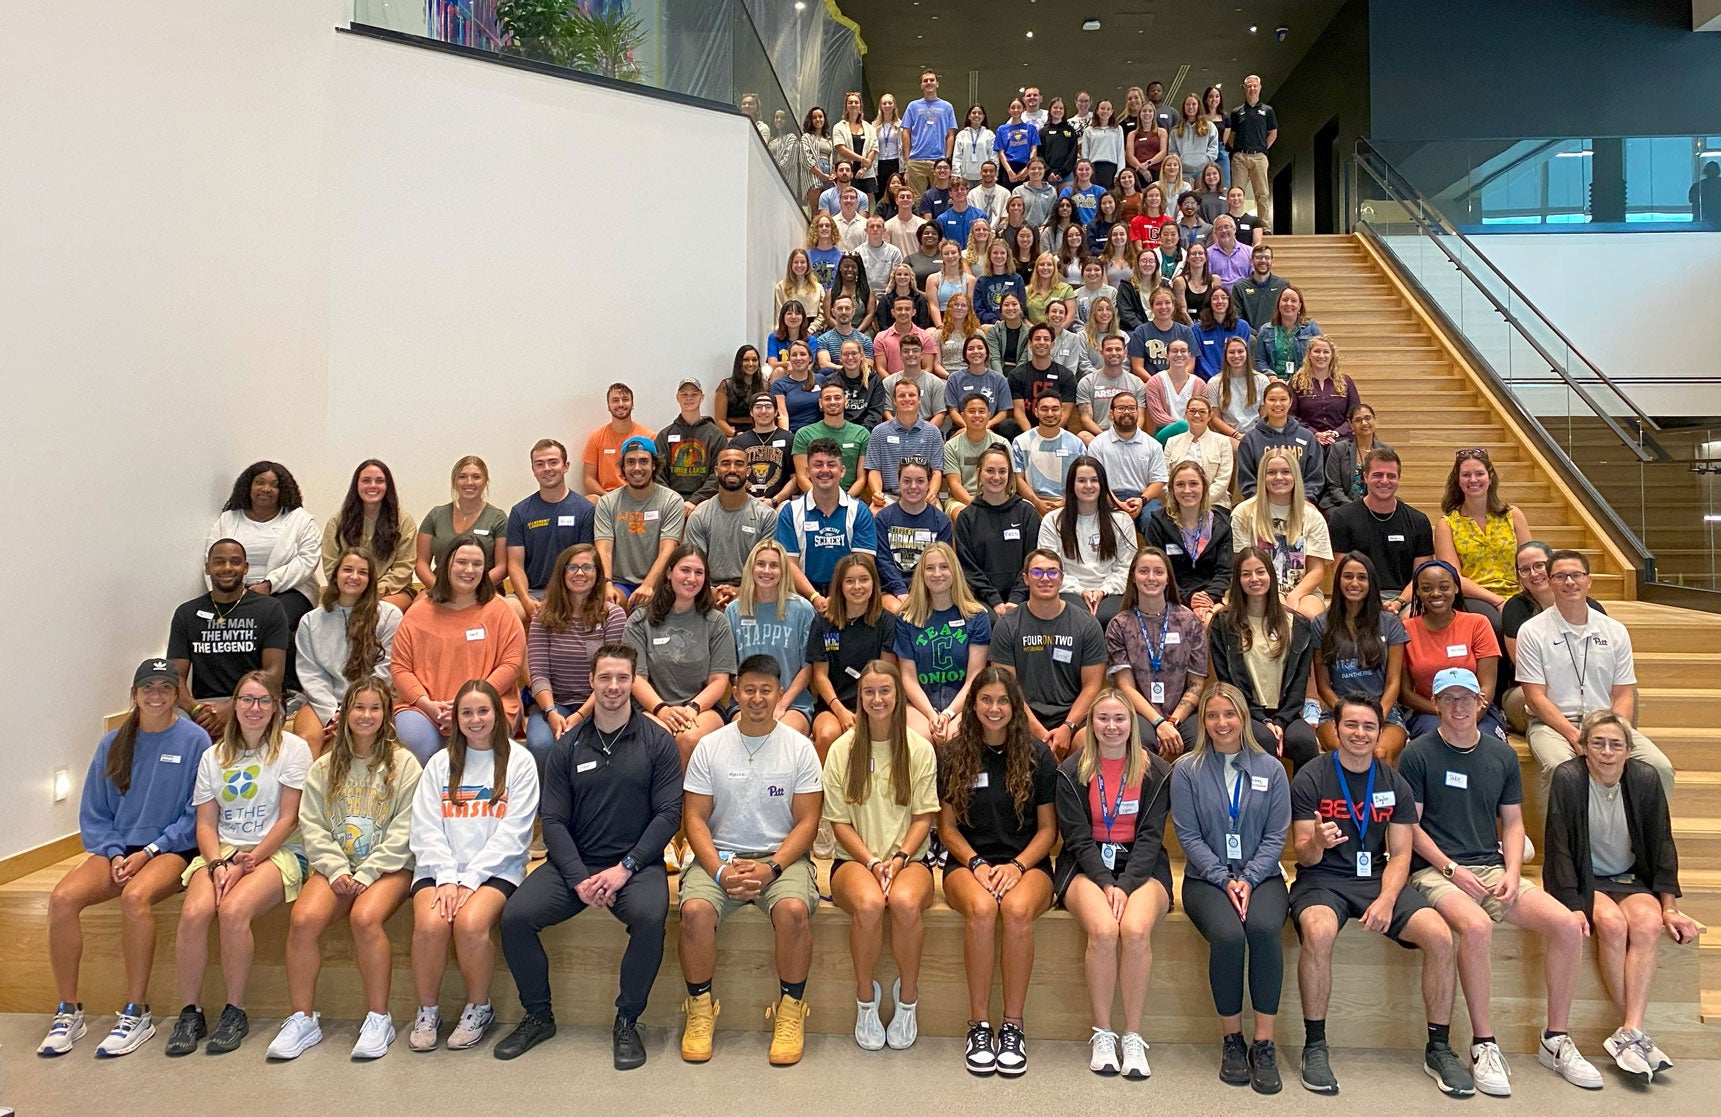 Class of 2025 Pitt DPT residential and hybrid students together at their orientation in Pittsburgh